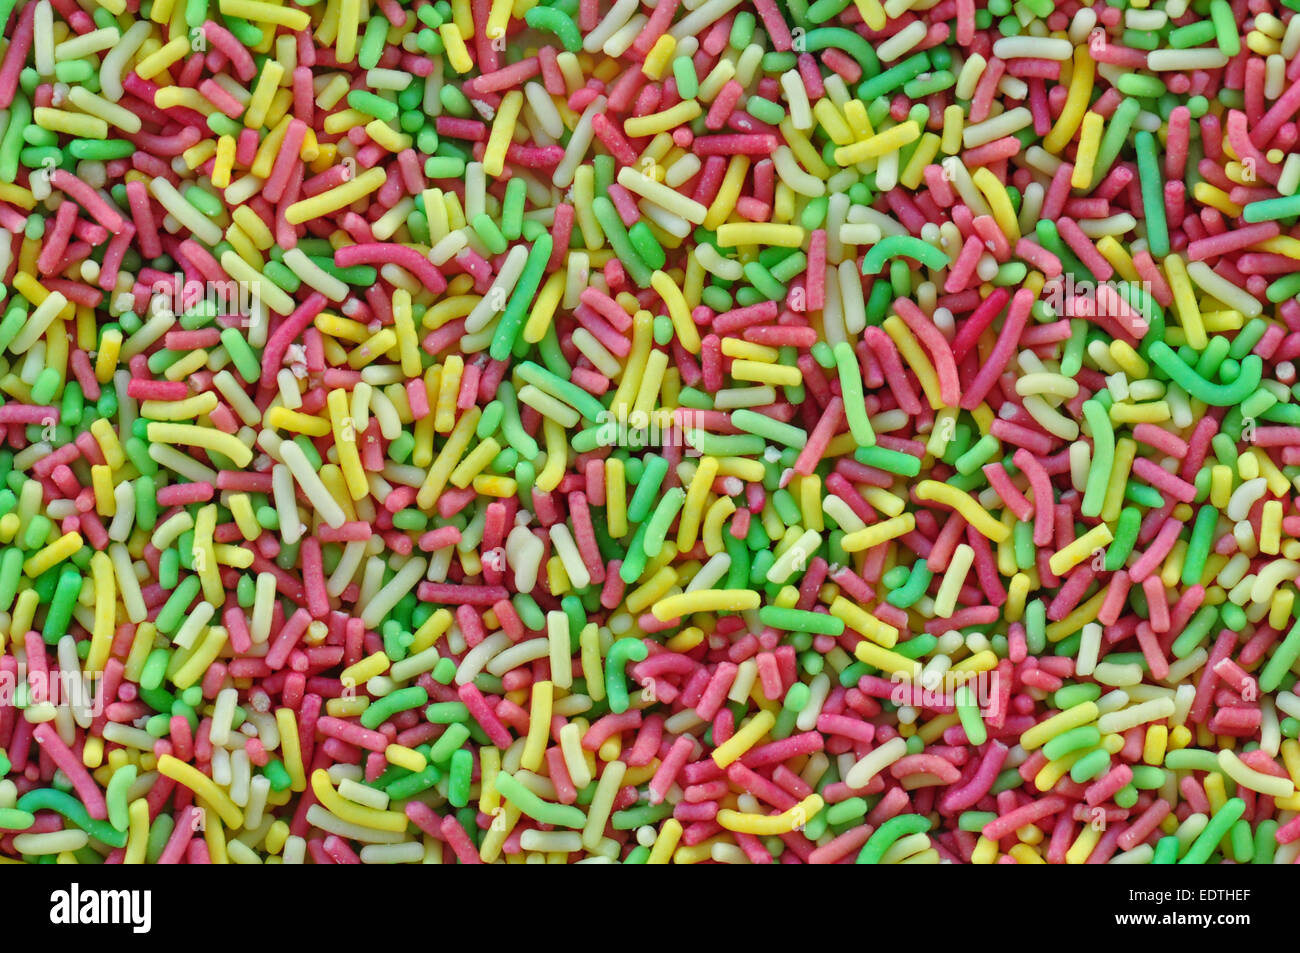 Colorful sprinkles garnish sweet candy topping abstract background. Stock Photo